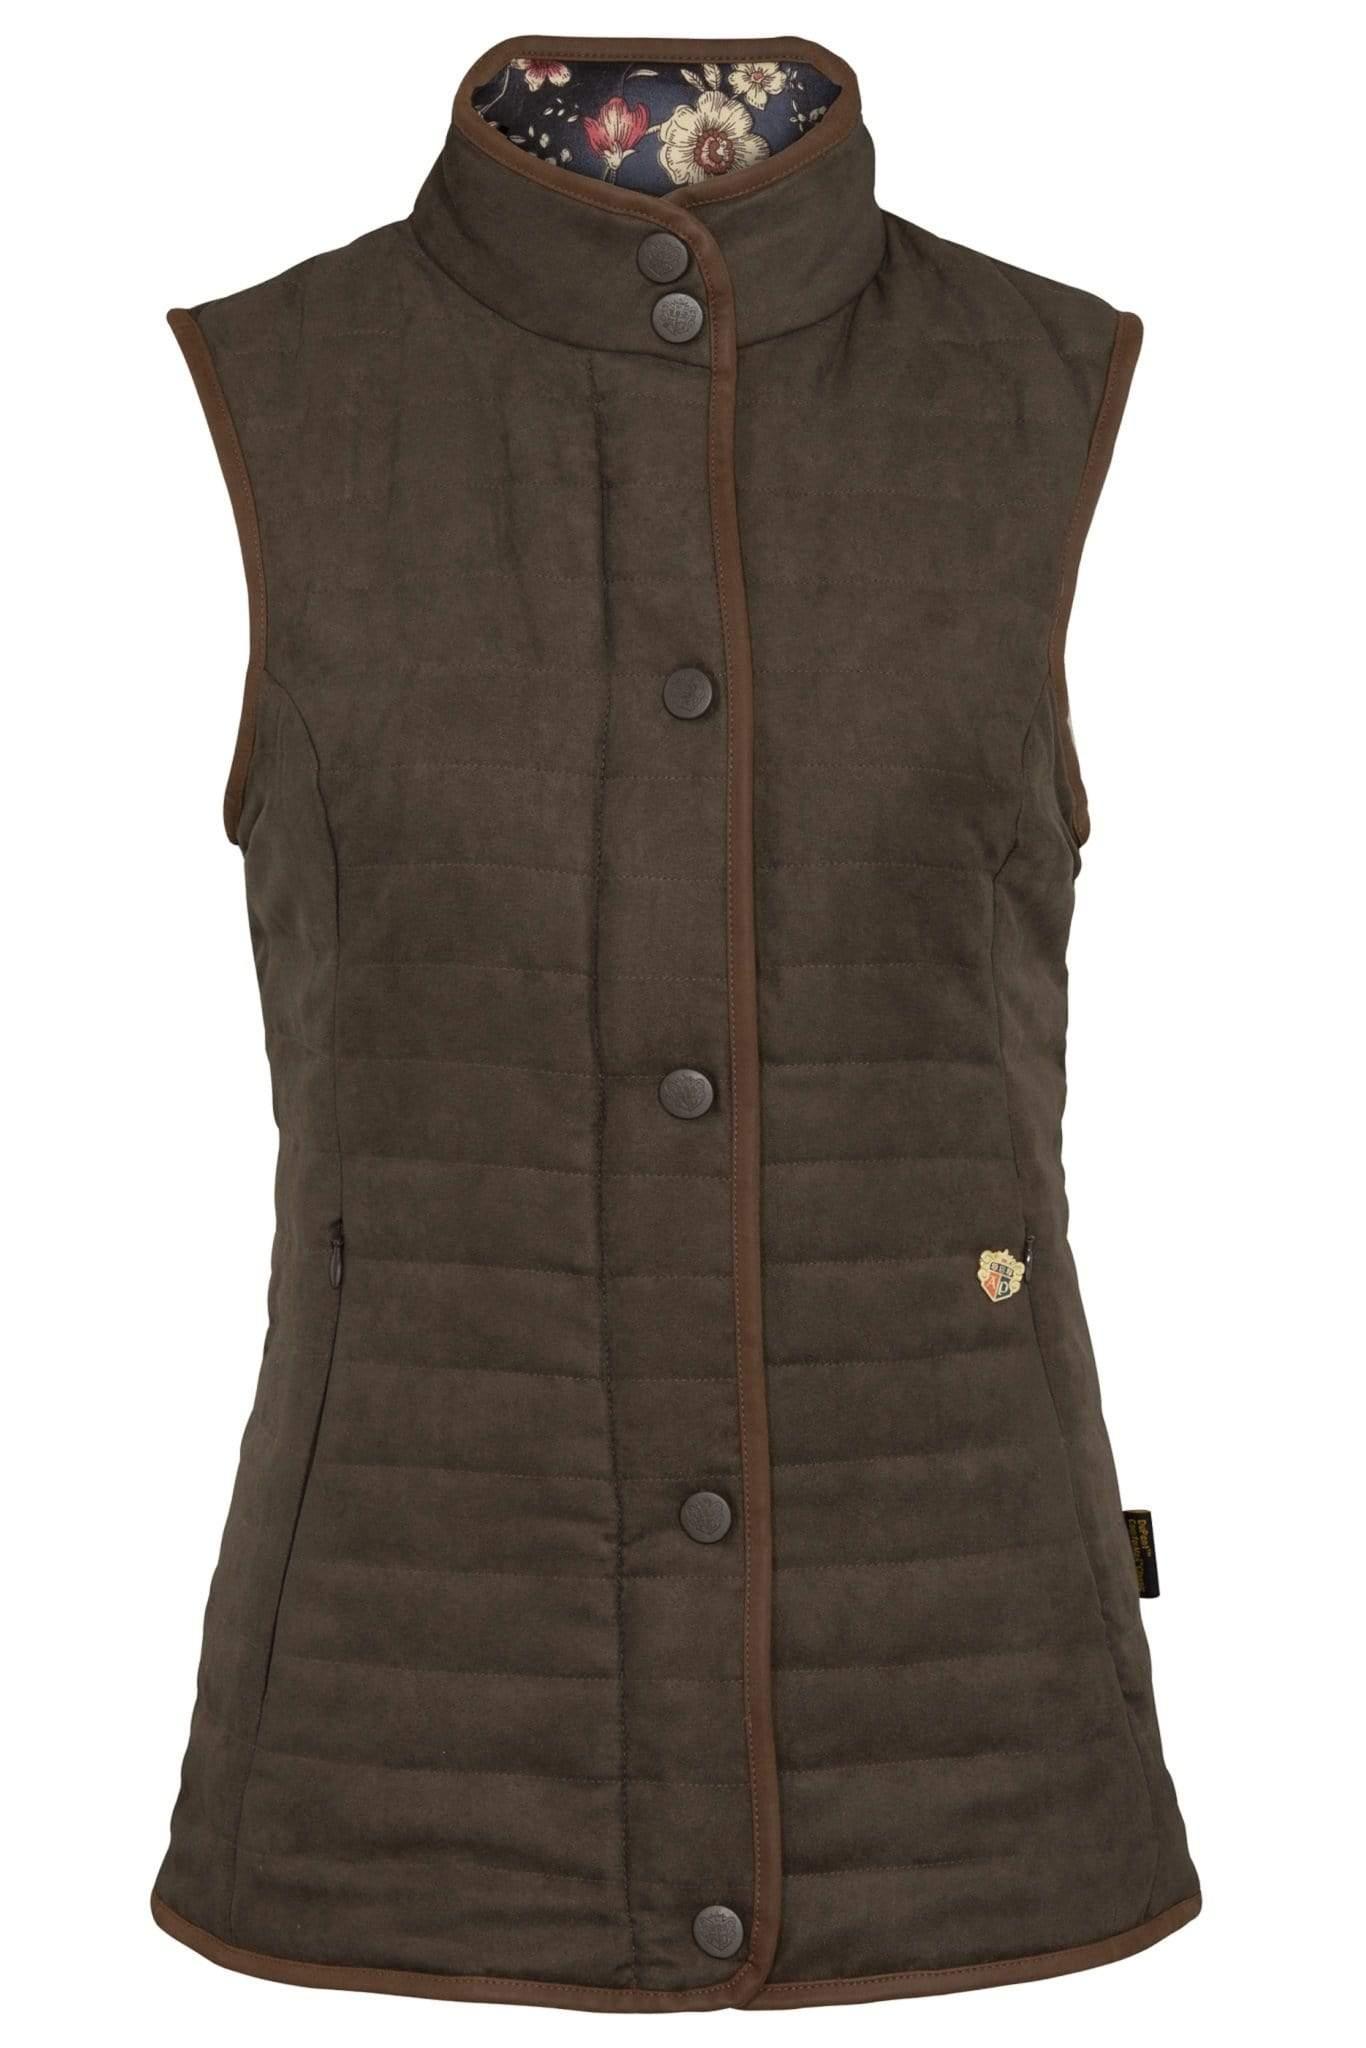 Alan Paine Fleeces & Quilted Gilets Alan Paine Felwell Ladies Quilted Waistcoat Wren